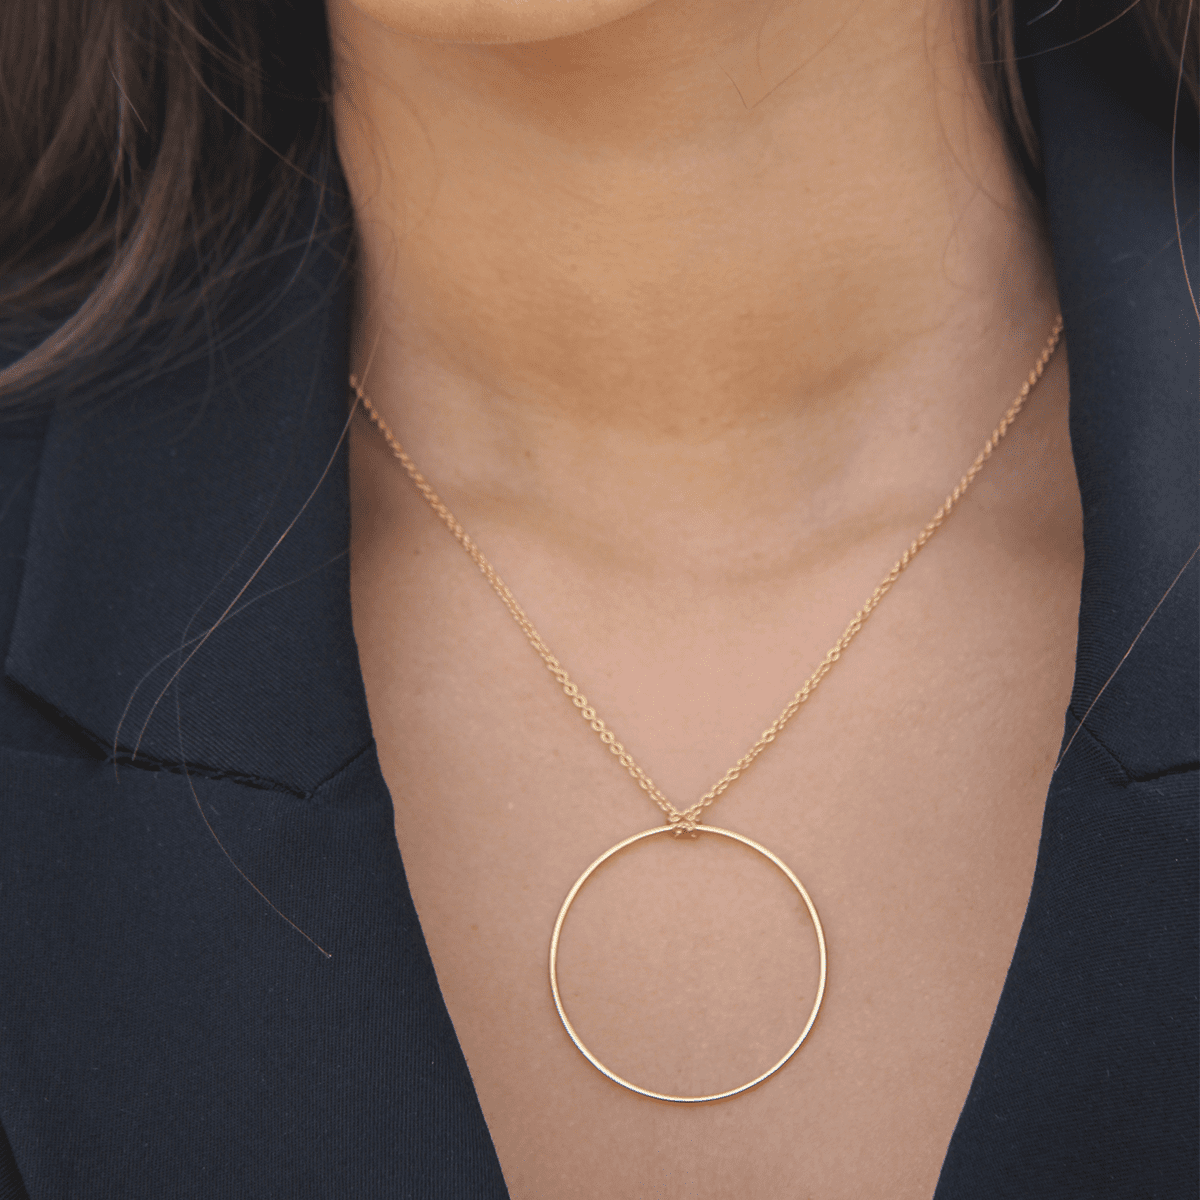 Model wearing handmade 18k gold plated circular pendant chain depicting exact size and appearance - Tanzire